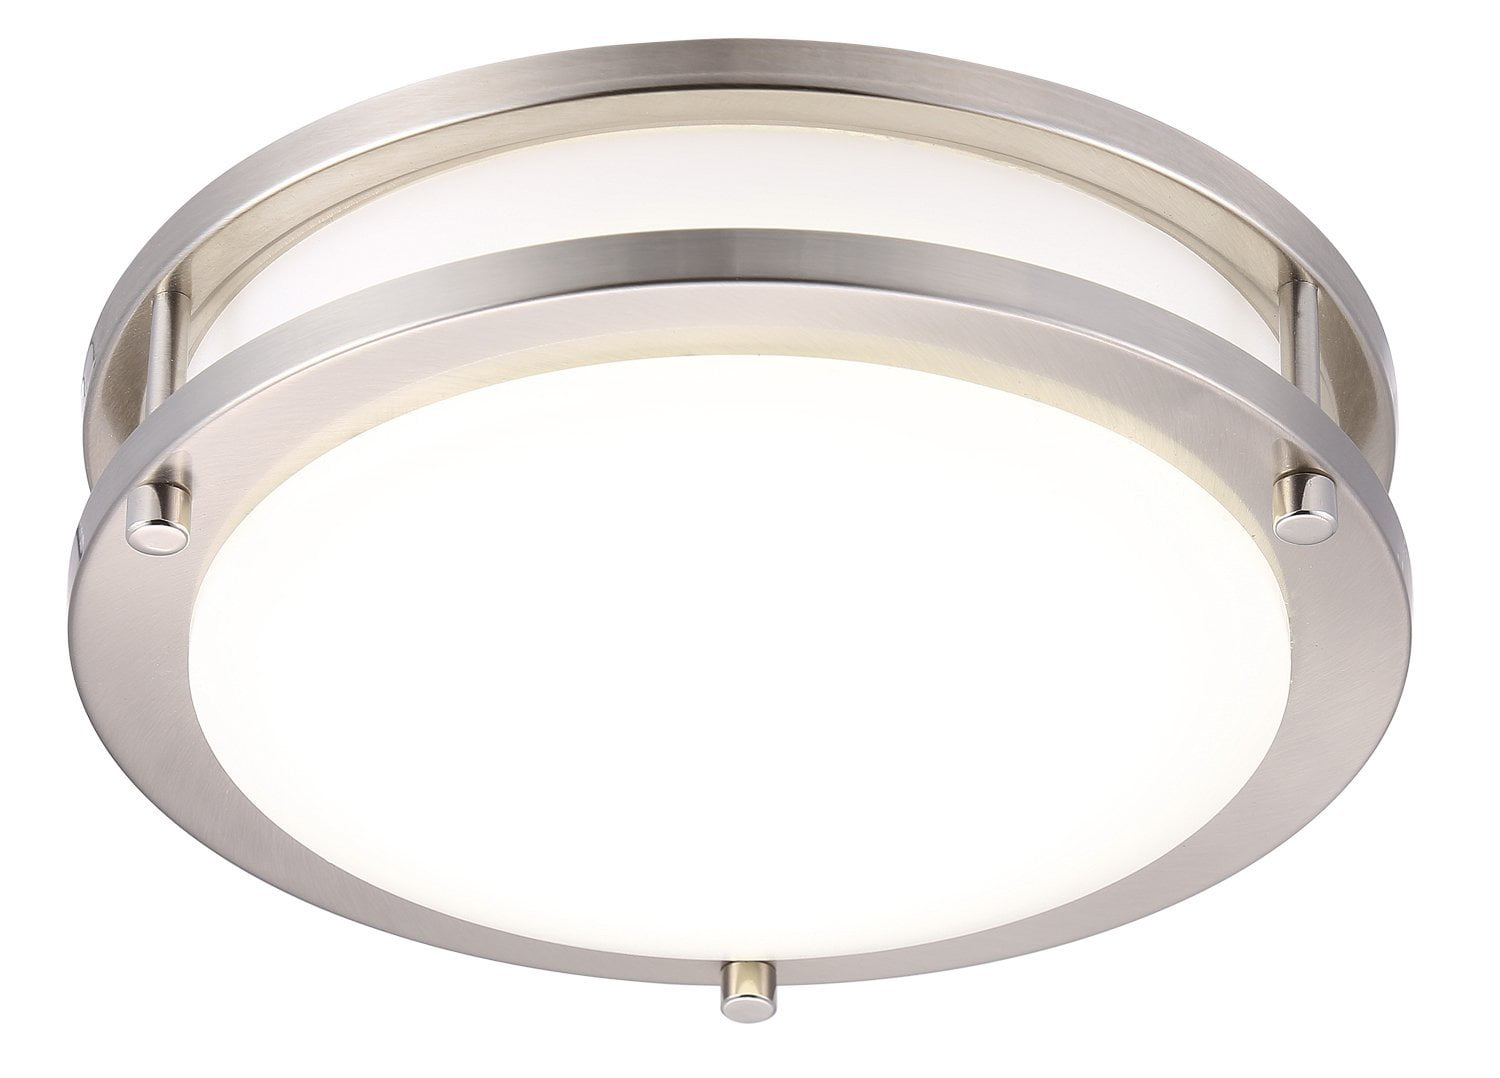 Cloudy Bay Led Flush Mount Ceiling Light Inch W W Equivalent